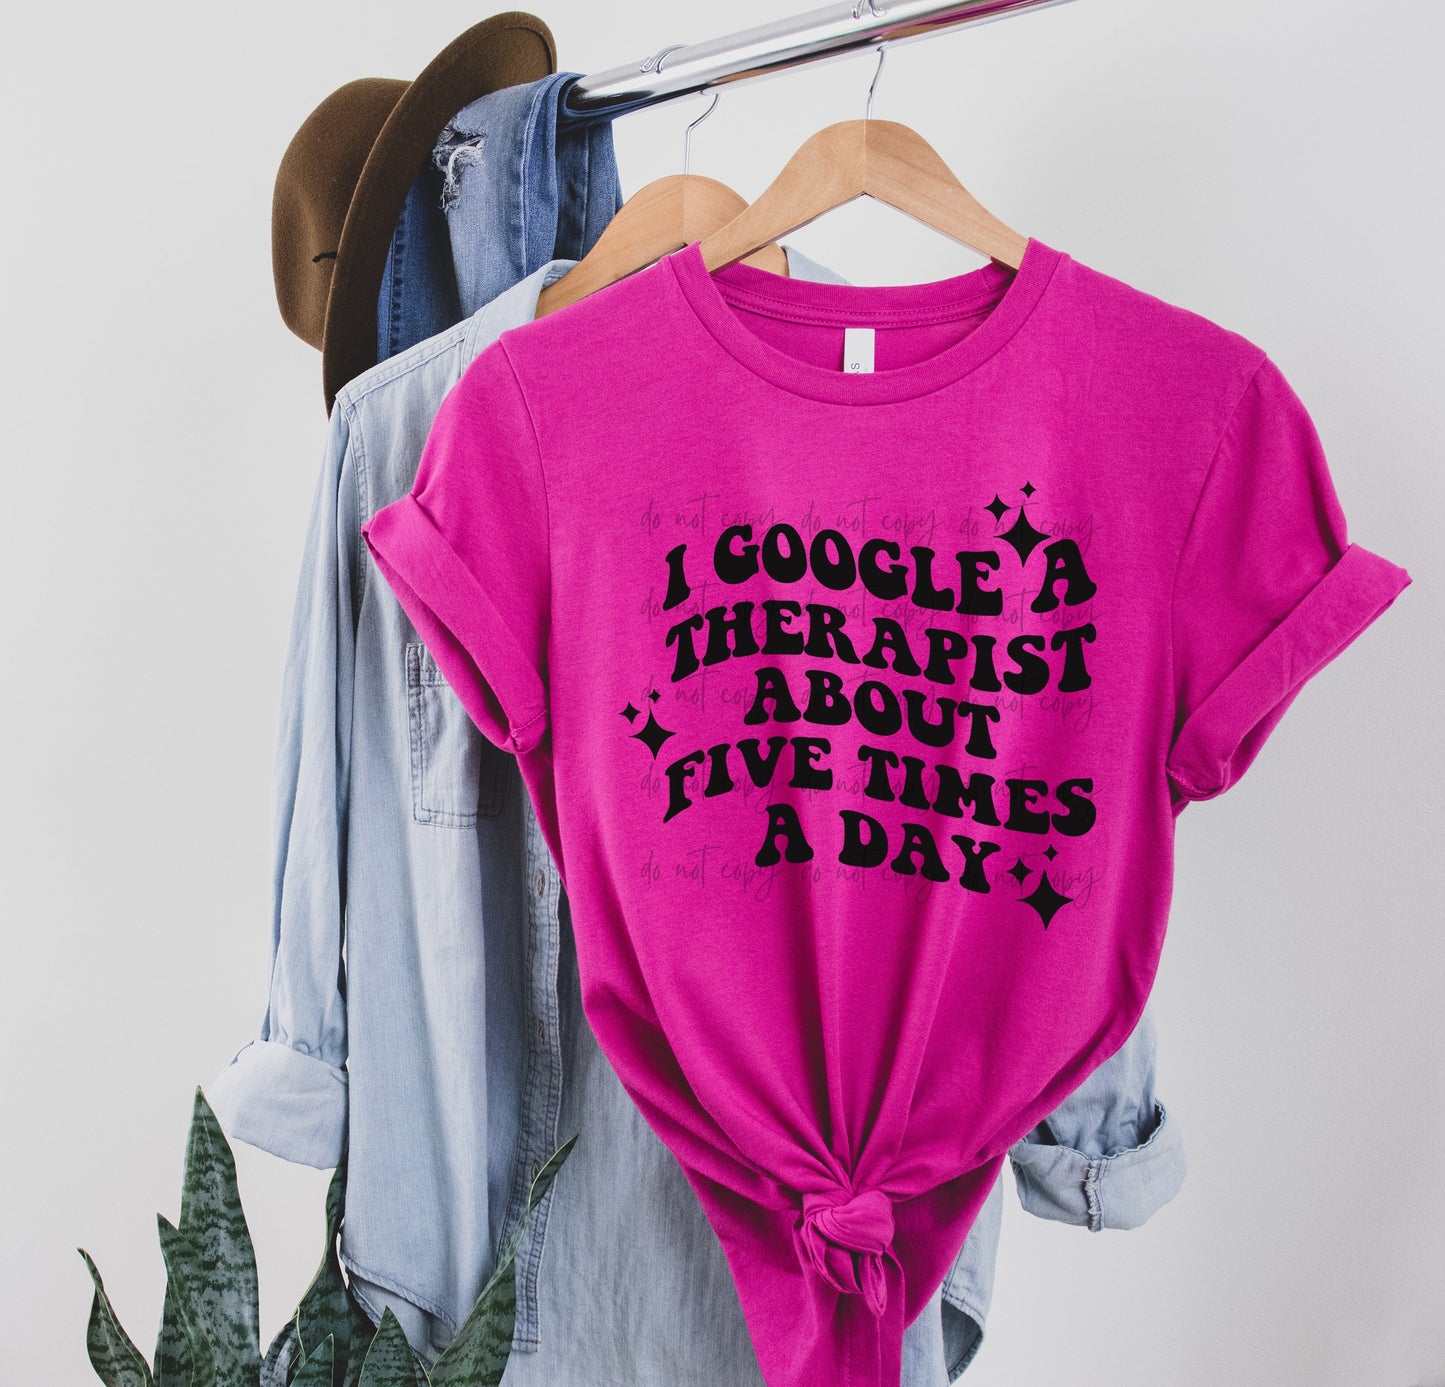 I Google A Therapist About Five Times A Day - berry